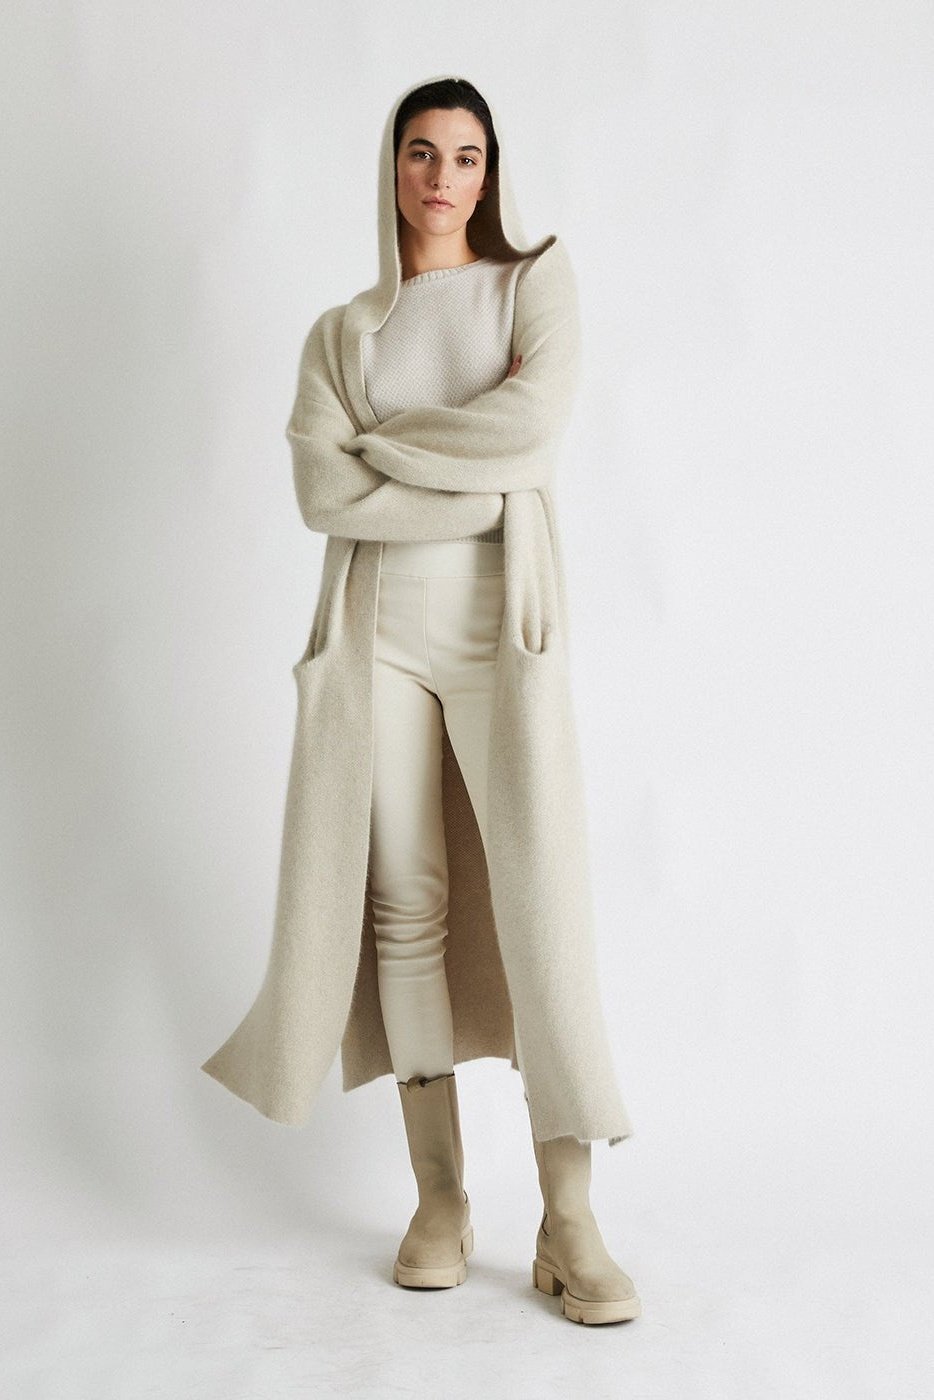 +Beryll Cashmere Coat with Hood | Shell Beach - +Beryll Cashmere Coat with Hood | Shell Beach - +Beryll Worn By Good People